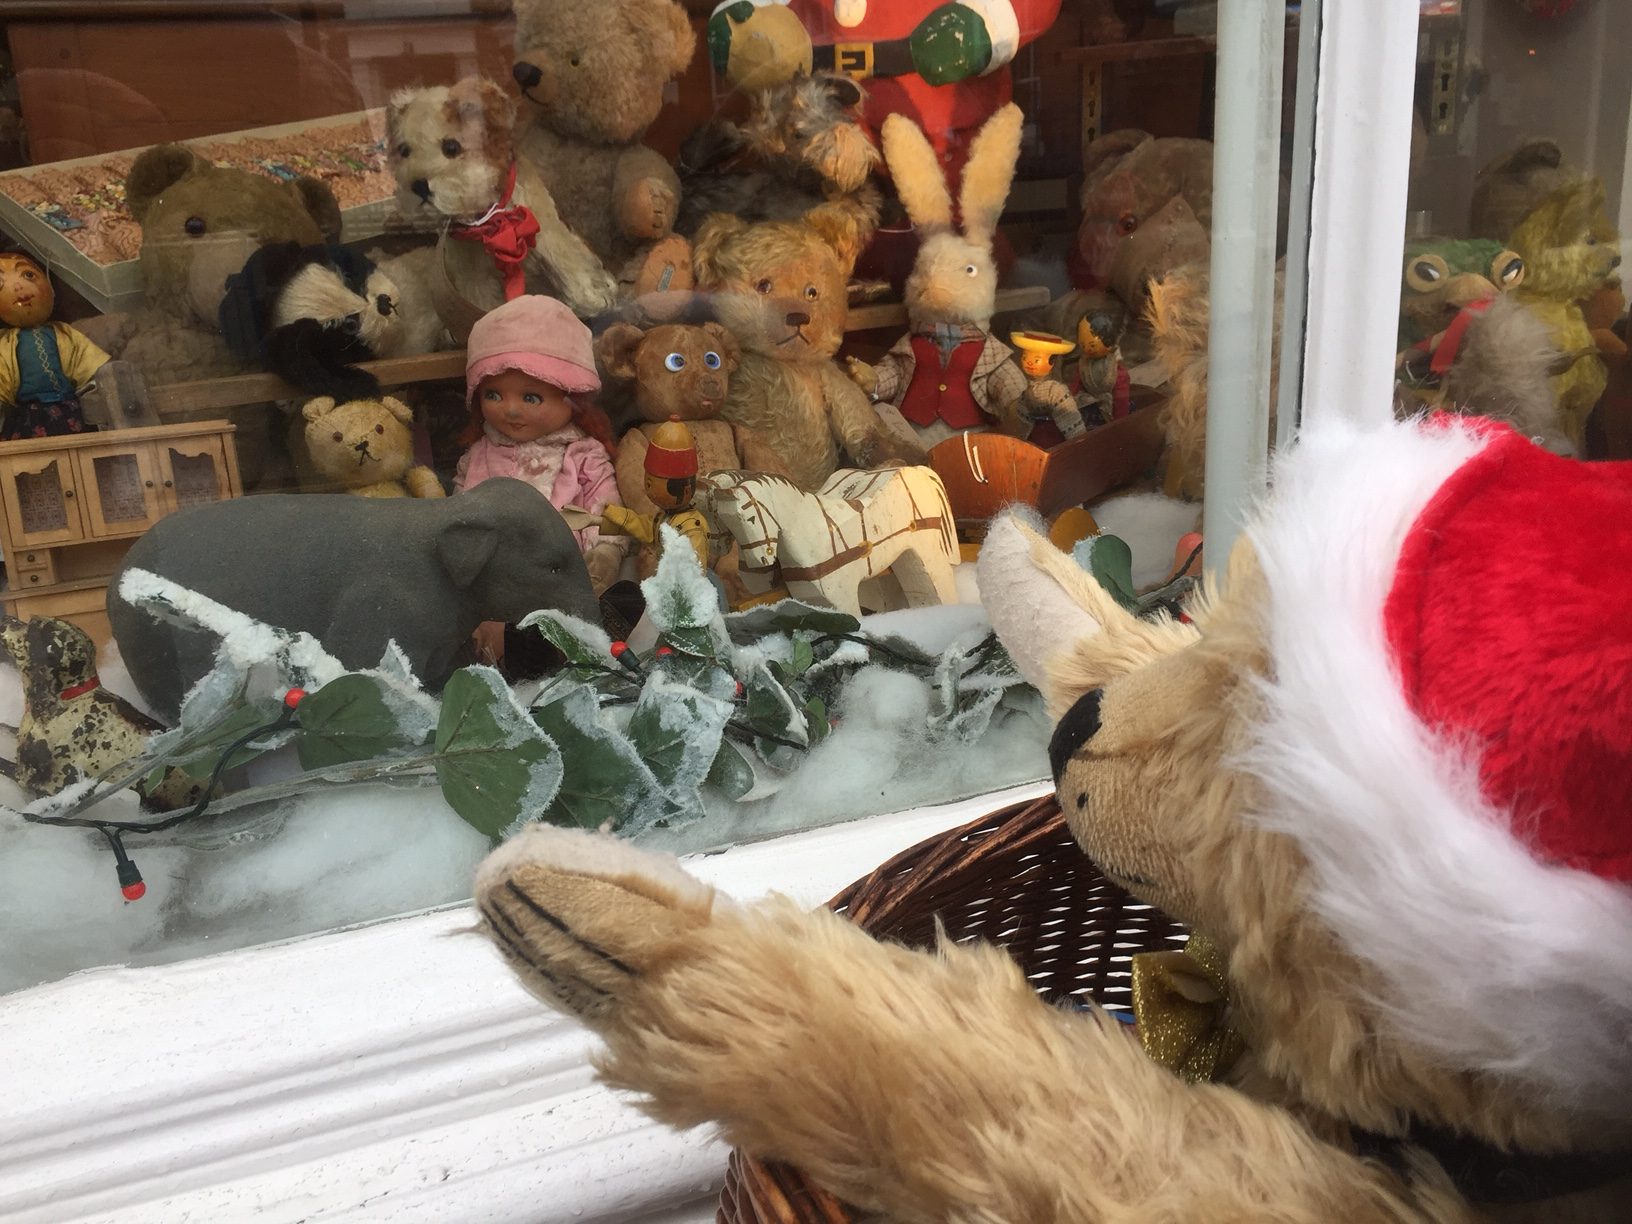 Old Bears - Bertie meets the bears at the Antiique Shop.